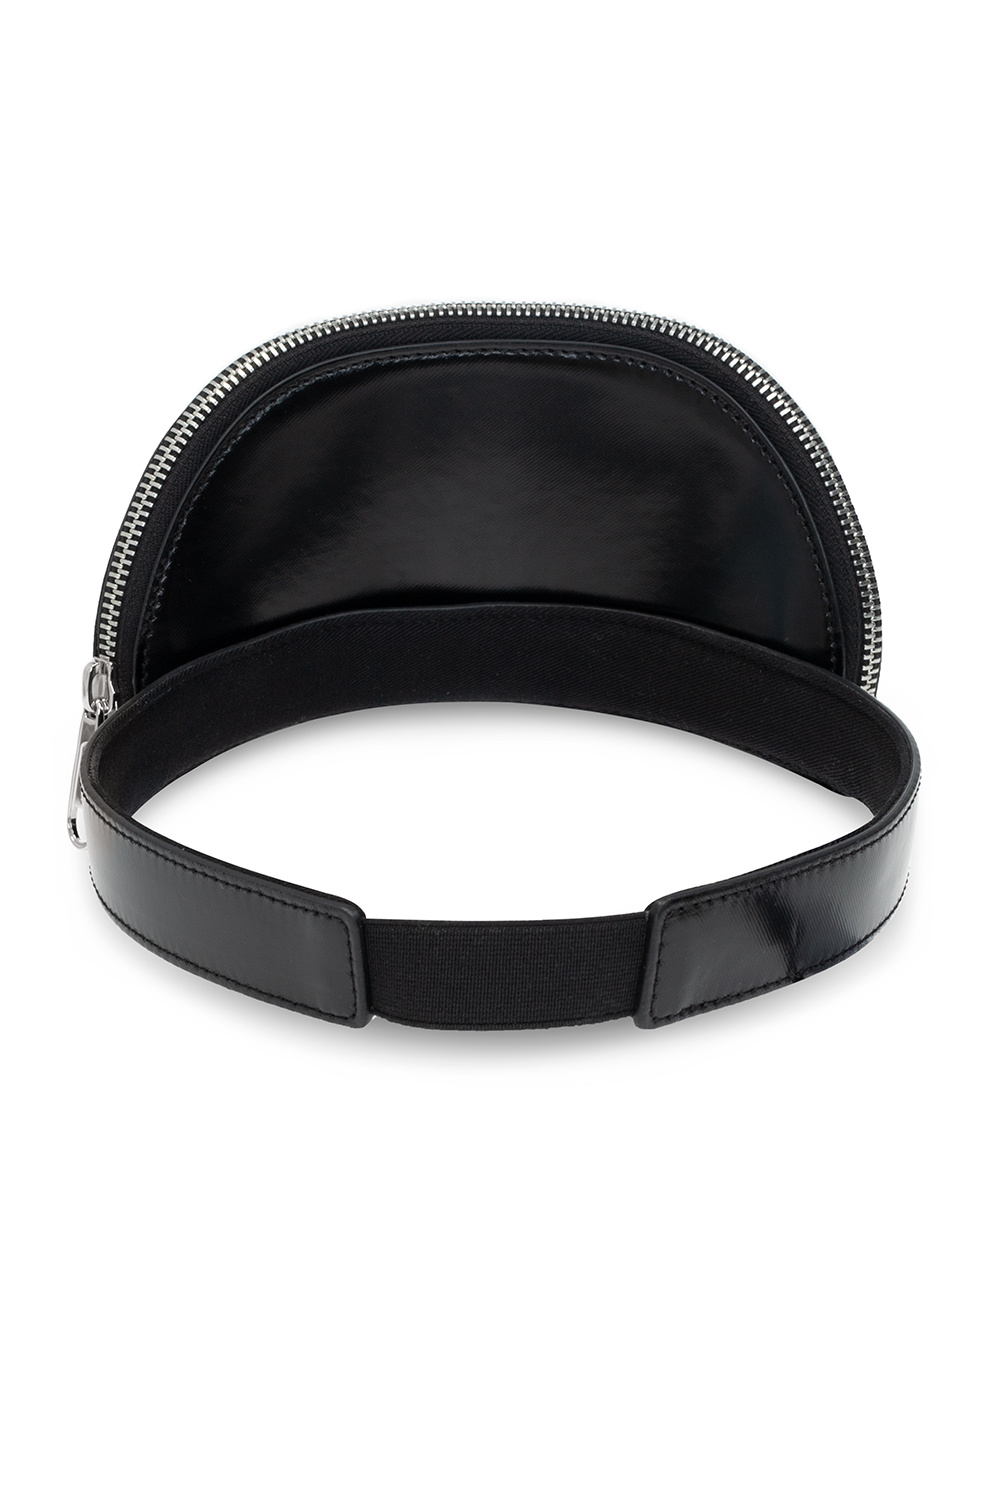 burberry Fashion Visor with detachable pouch